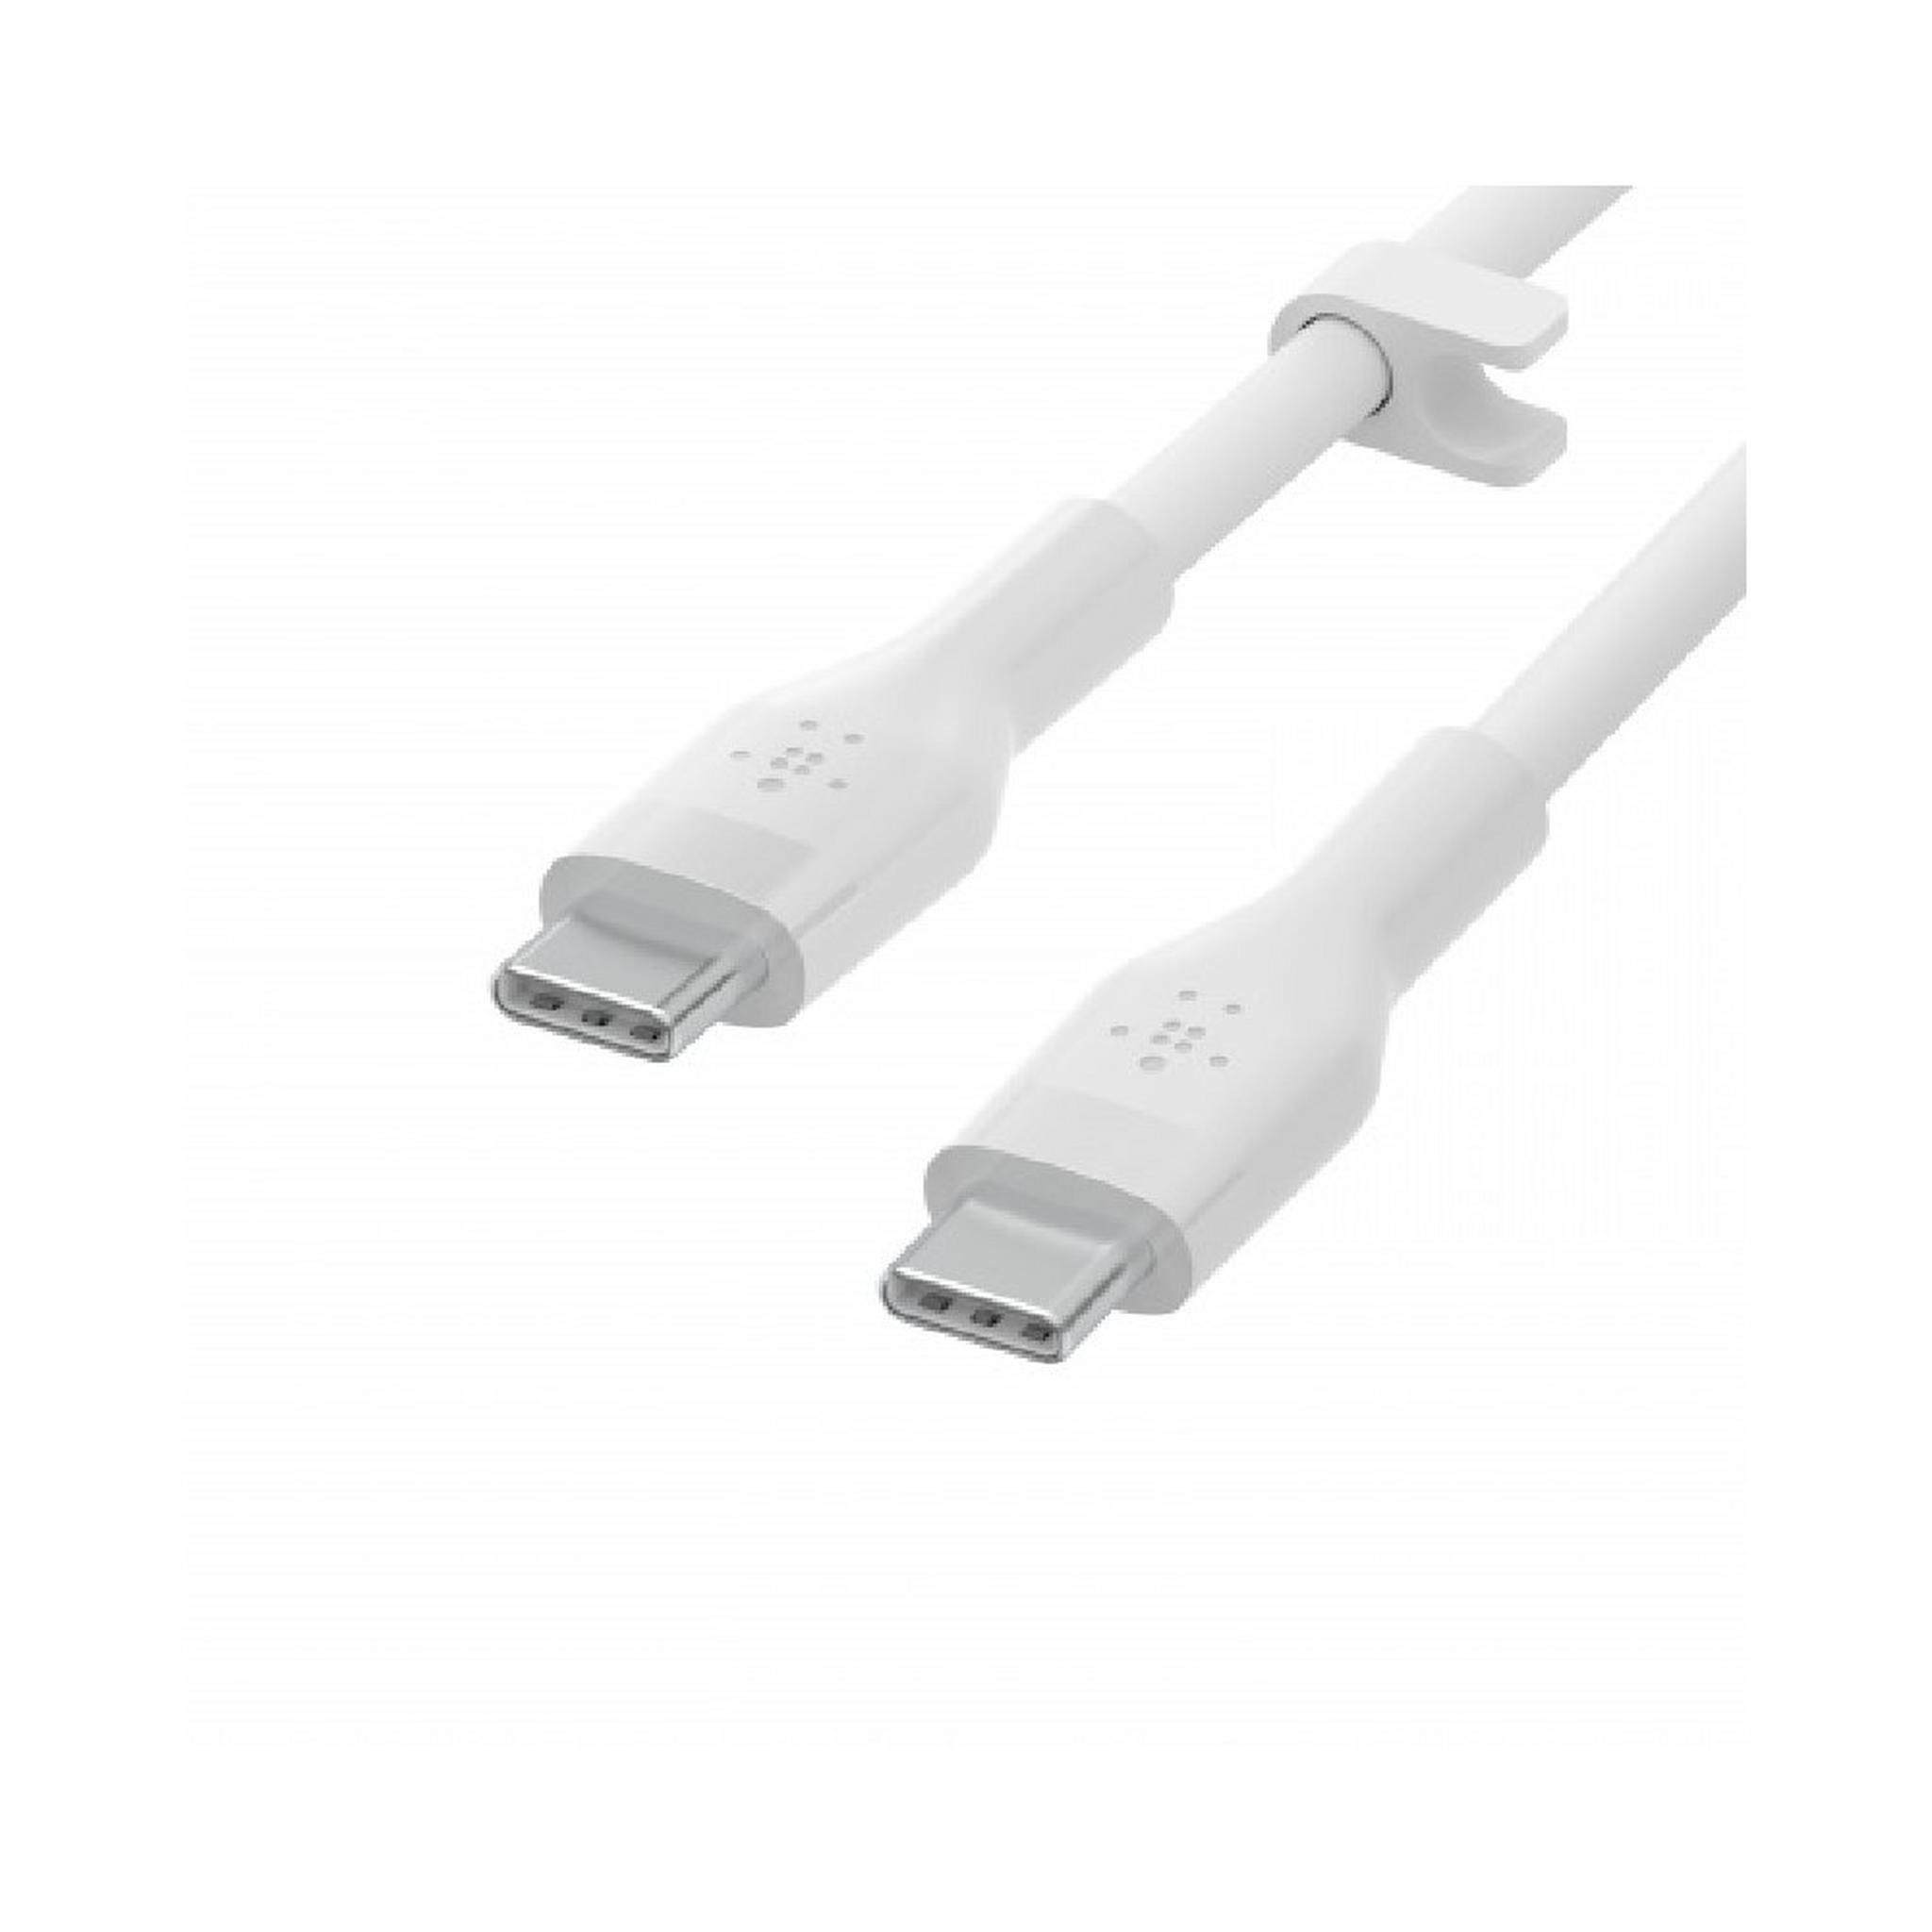 BELKIN Boostcharge USB-C To USB-C Cable, 3M, CAB009bt3MWH – White